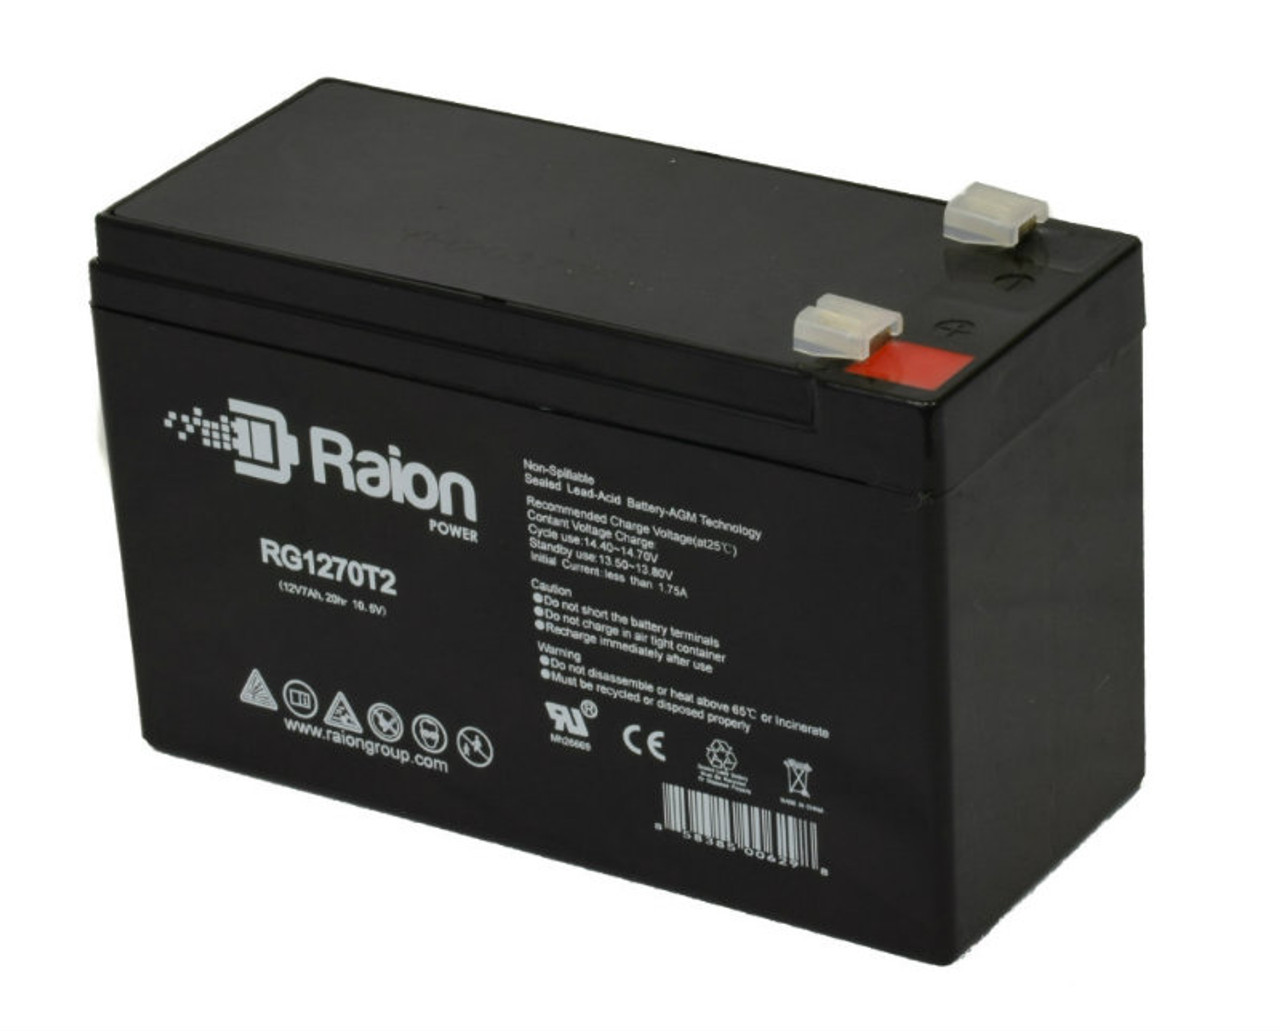 Raion Power RG1270T1 12V 7Ah Non-Spillable Replacement Battery for Voltmax VX-1270 F1